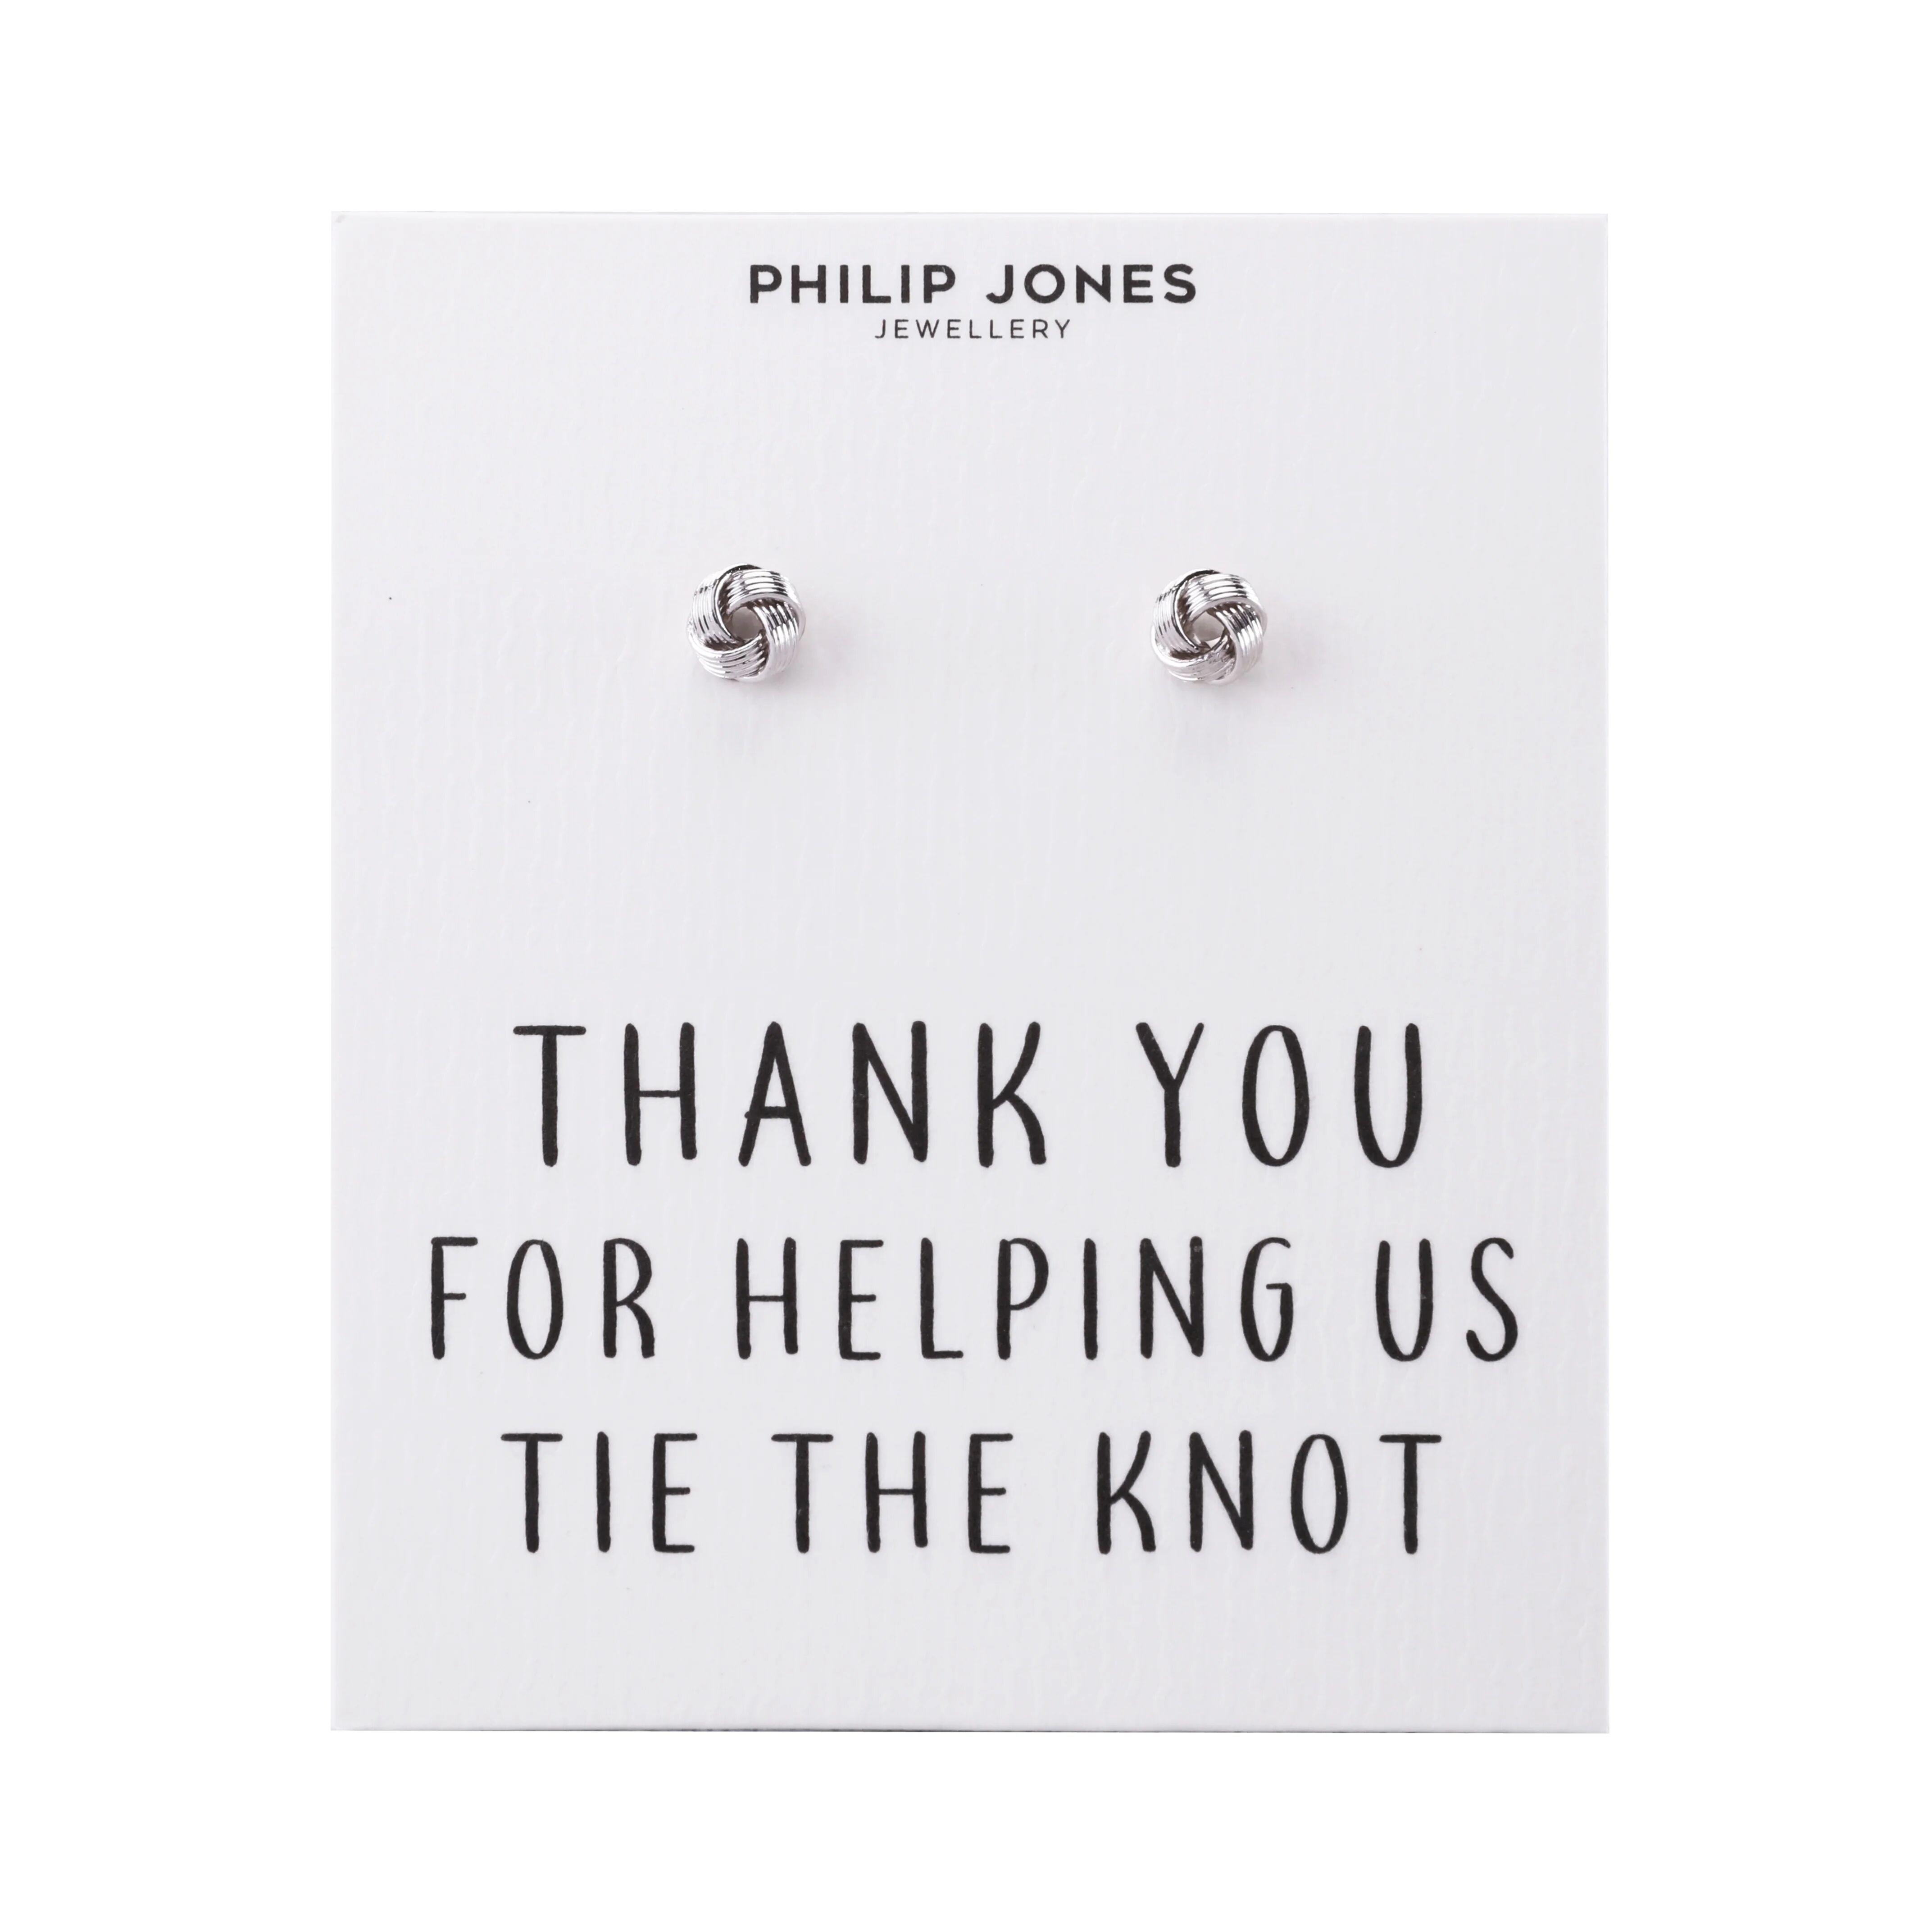 Philip Jones Jewellery Silver Plated Thank You for Helping us Tie The Knot Earrings with Quote Card